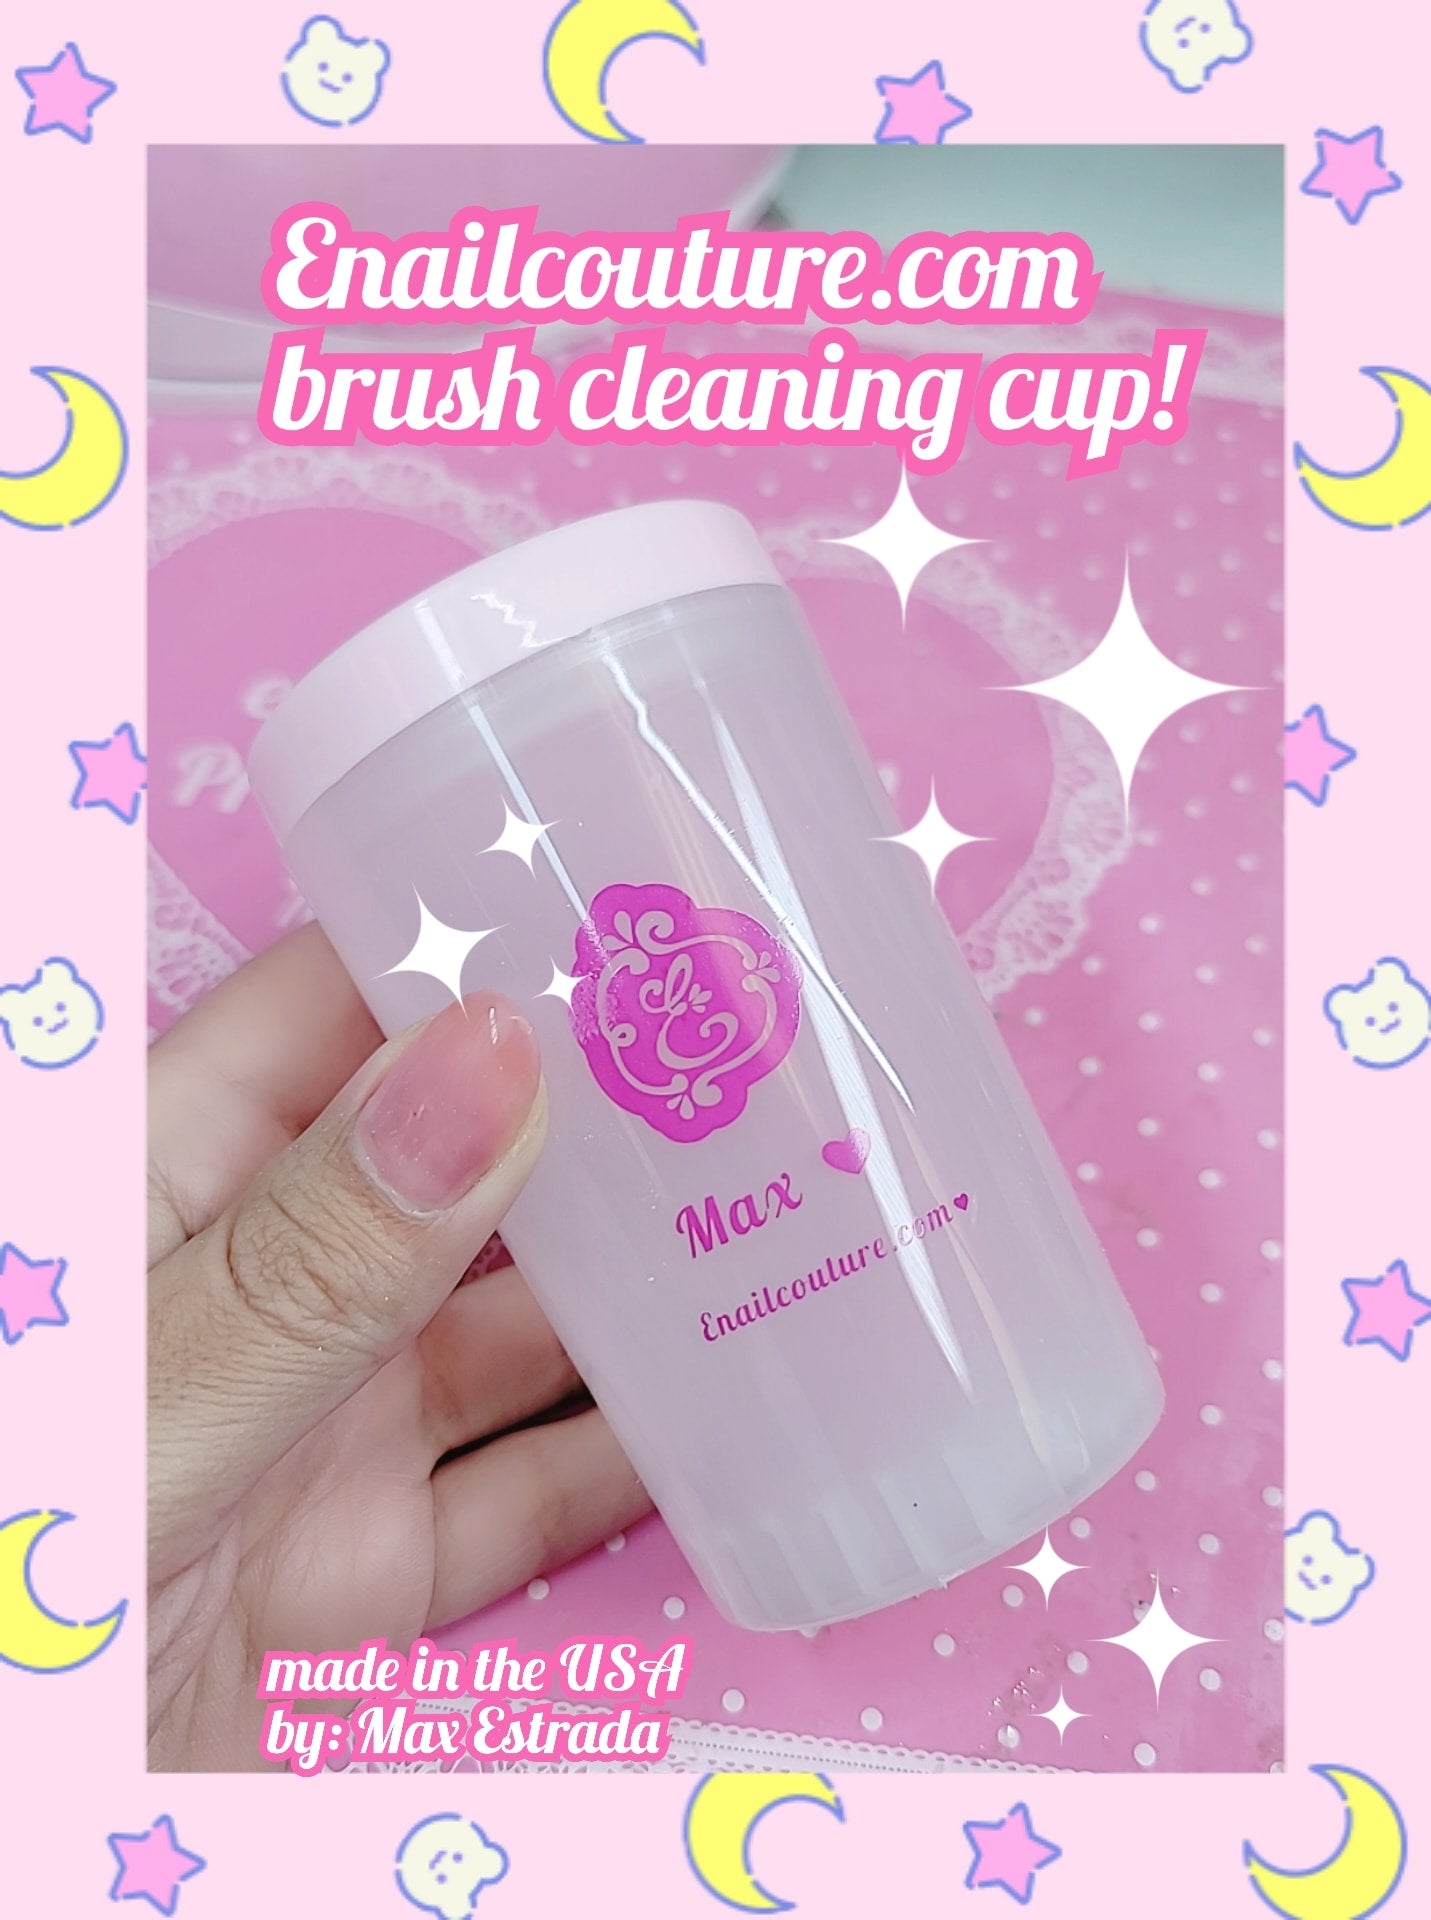 Brush Cleaning Cup (1 Piece Nail Art Brush Cleaner Cup Nail Art Tip Brushes Holder Remover Cup UV Gel Pen Polish Remover Cleanser Cup Immersion Brush Cleaner Pot Multiple Size Slots, pink Lid)